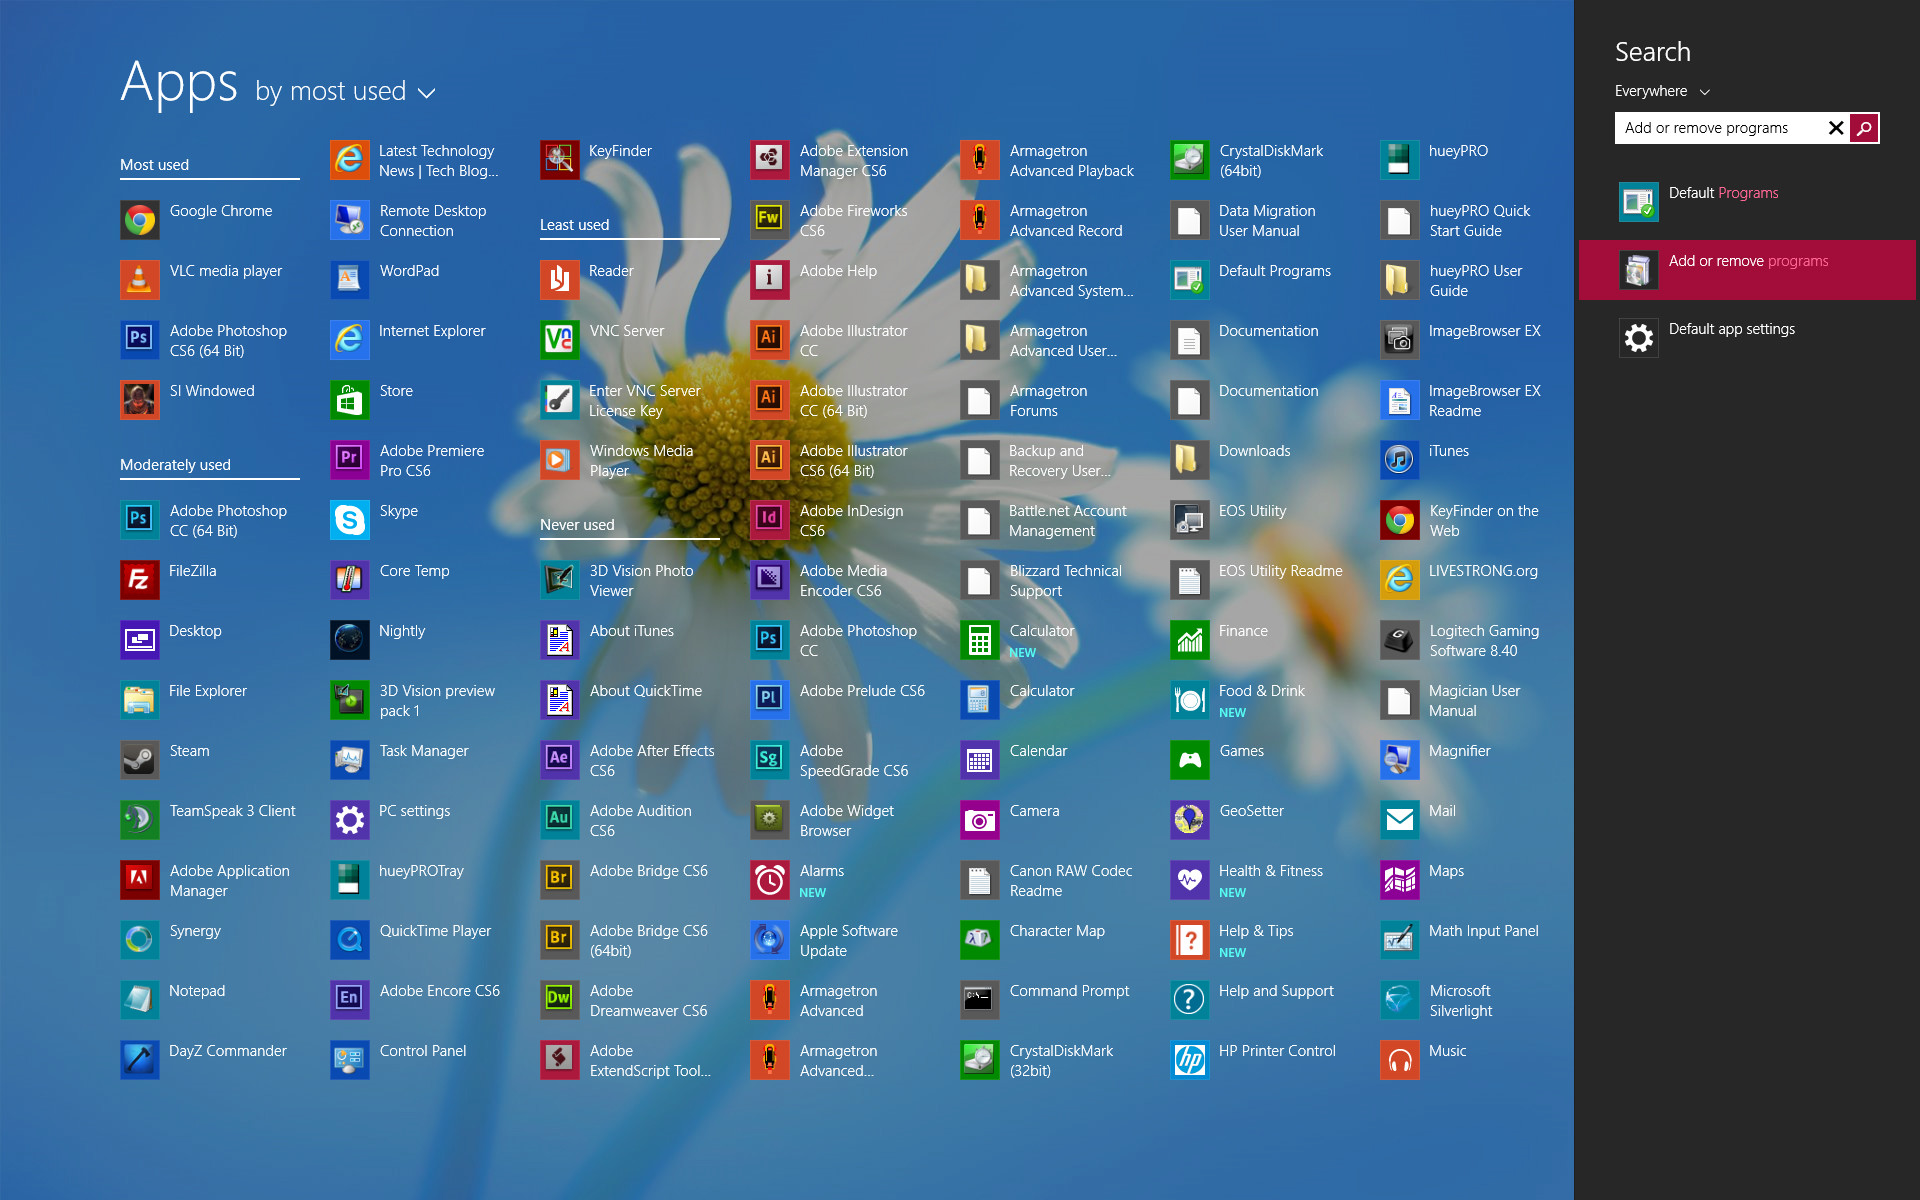 Searching in the new Windows 8.1 Apps view